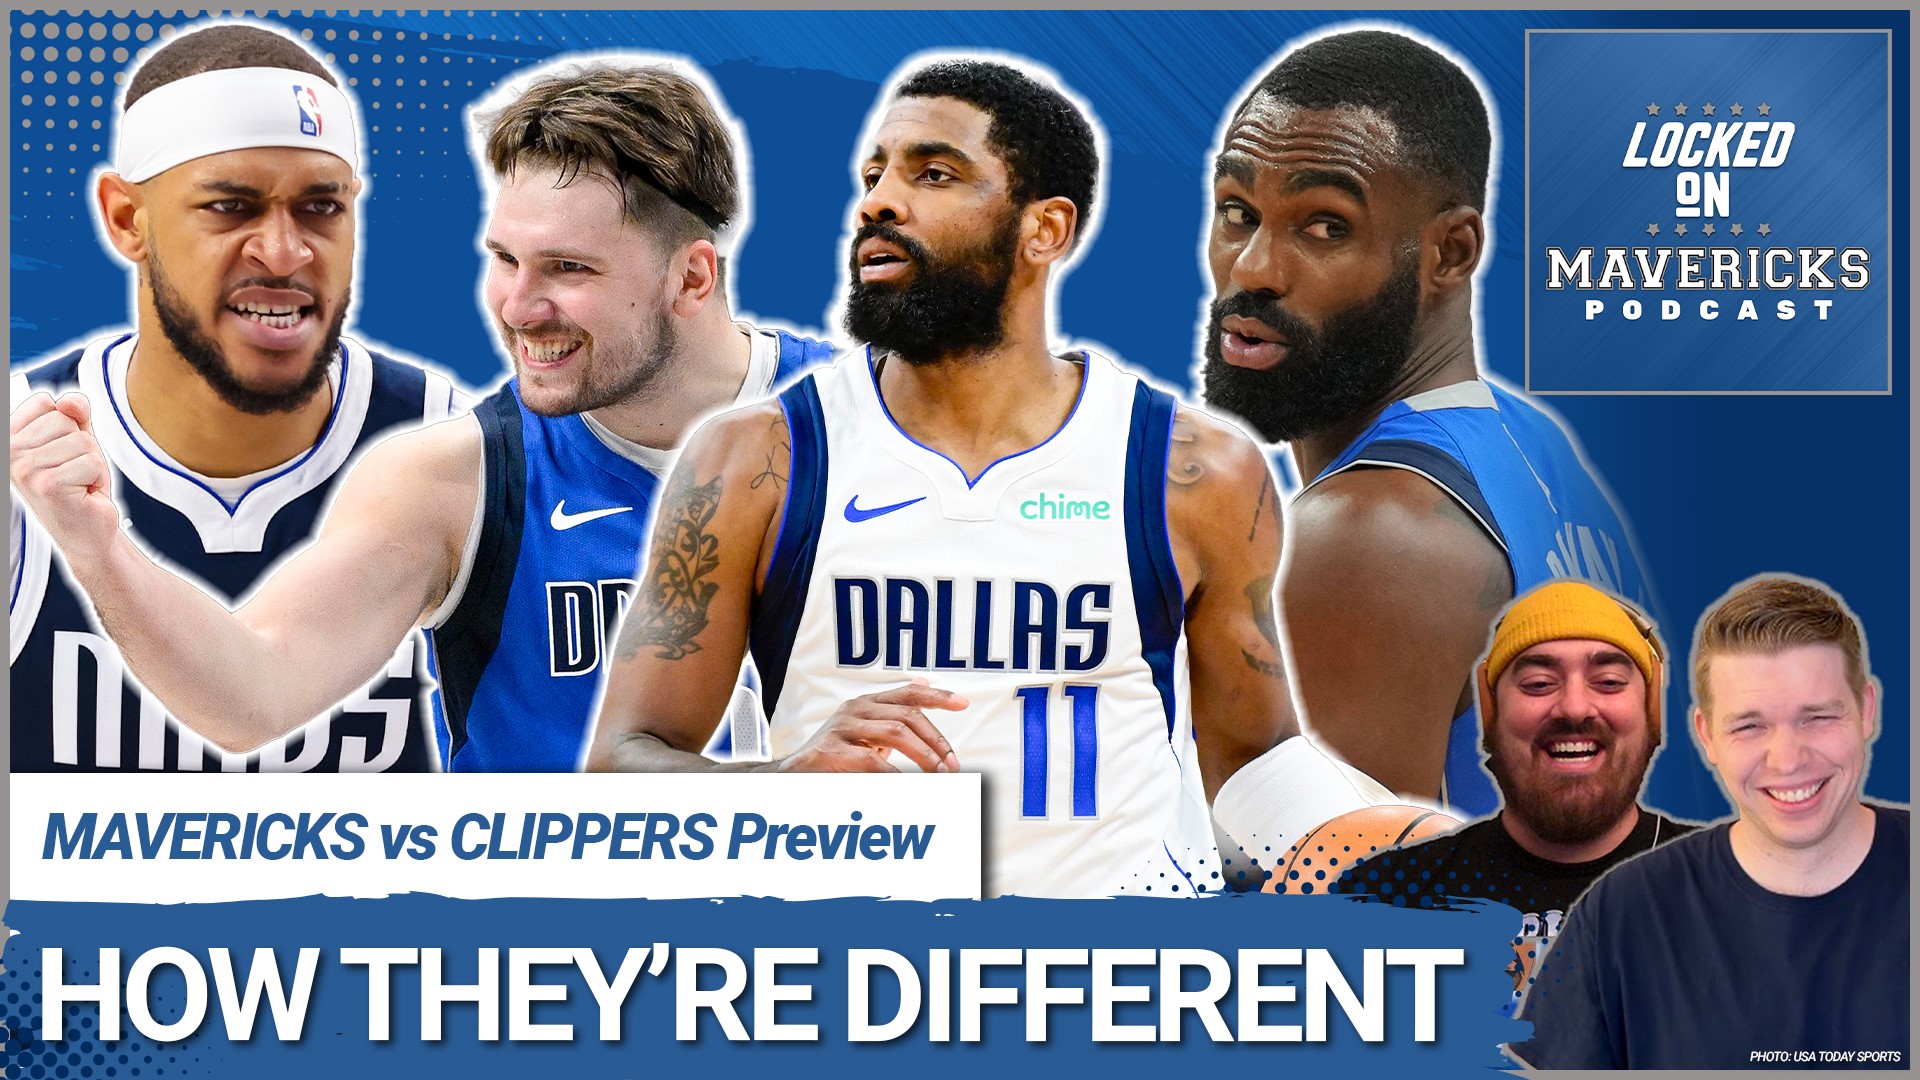 Nick Angstadt & Isaac Harris breakdown how Luka Doncic, Kyrie Irving, and the Dallas Mavericks are different now compared to the last time they played the Clippers.